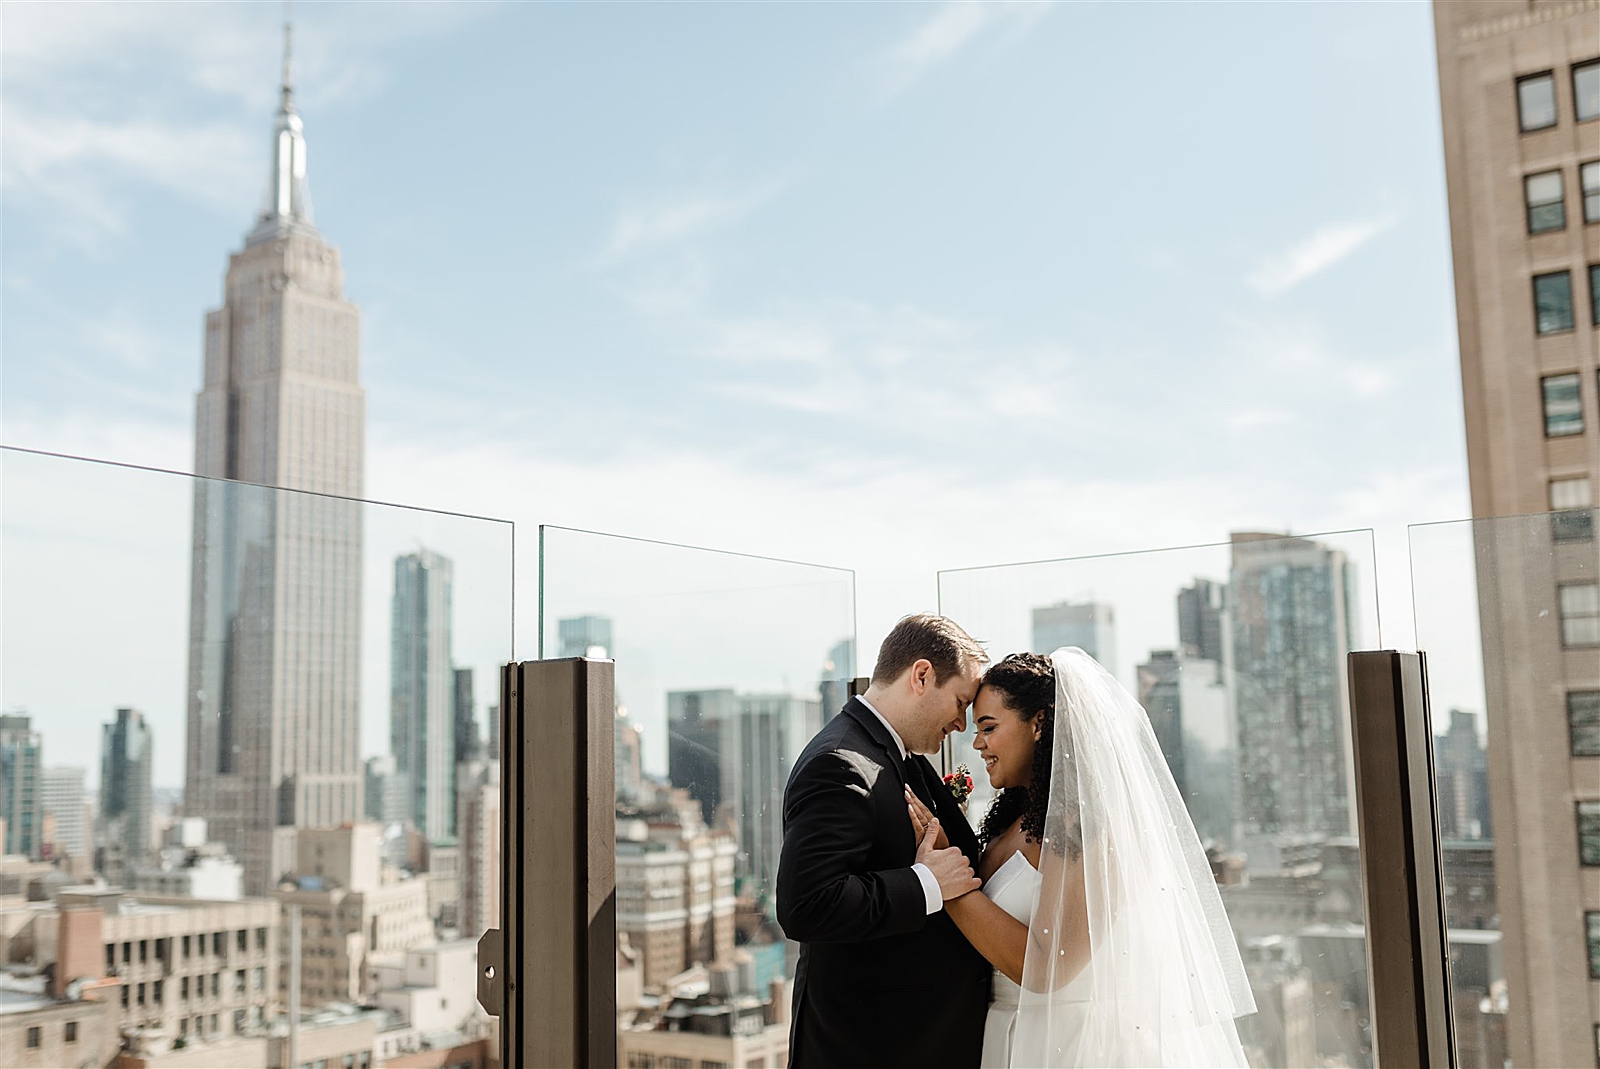 Bride and Groom embrace of the roof of the Skylark as the Empire State Building stuns in the background.